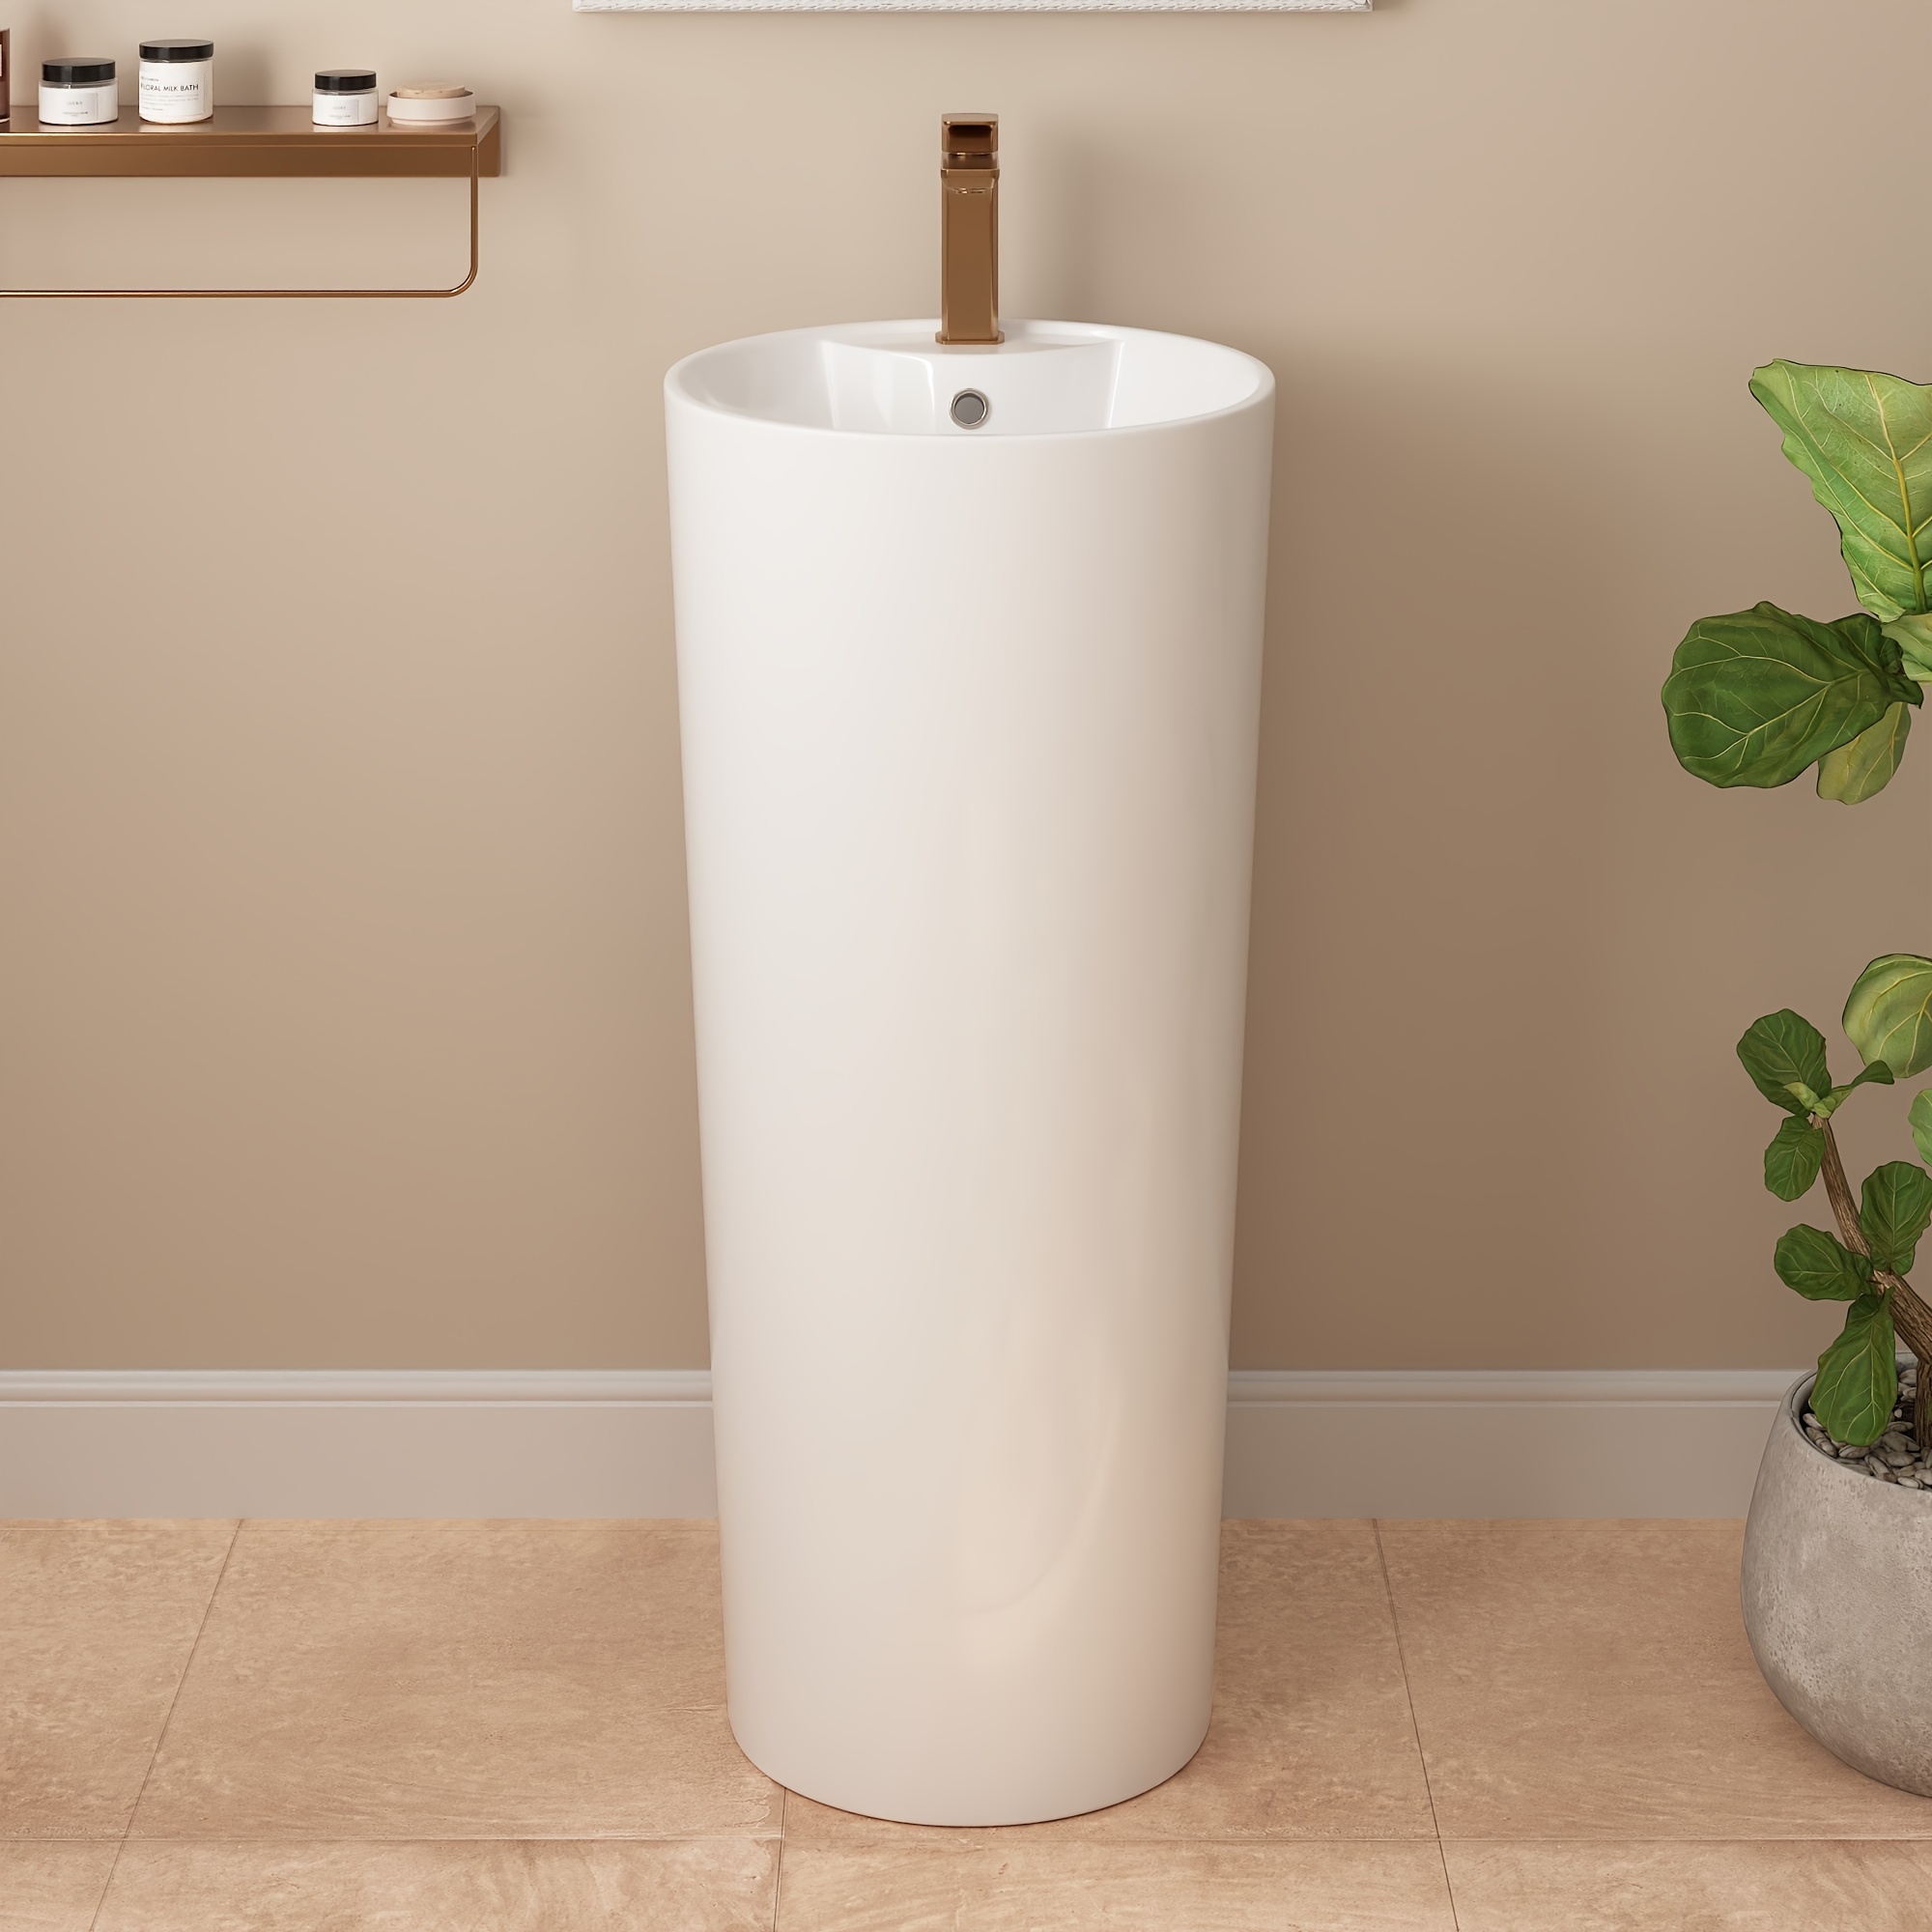 

Deervalley Dv-1p527 Pedestal Sink - White 15" X 15"bathroom Sink With Overflow And Pre-drilled Hole